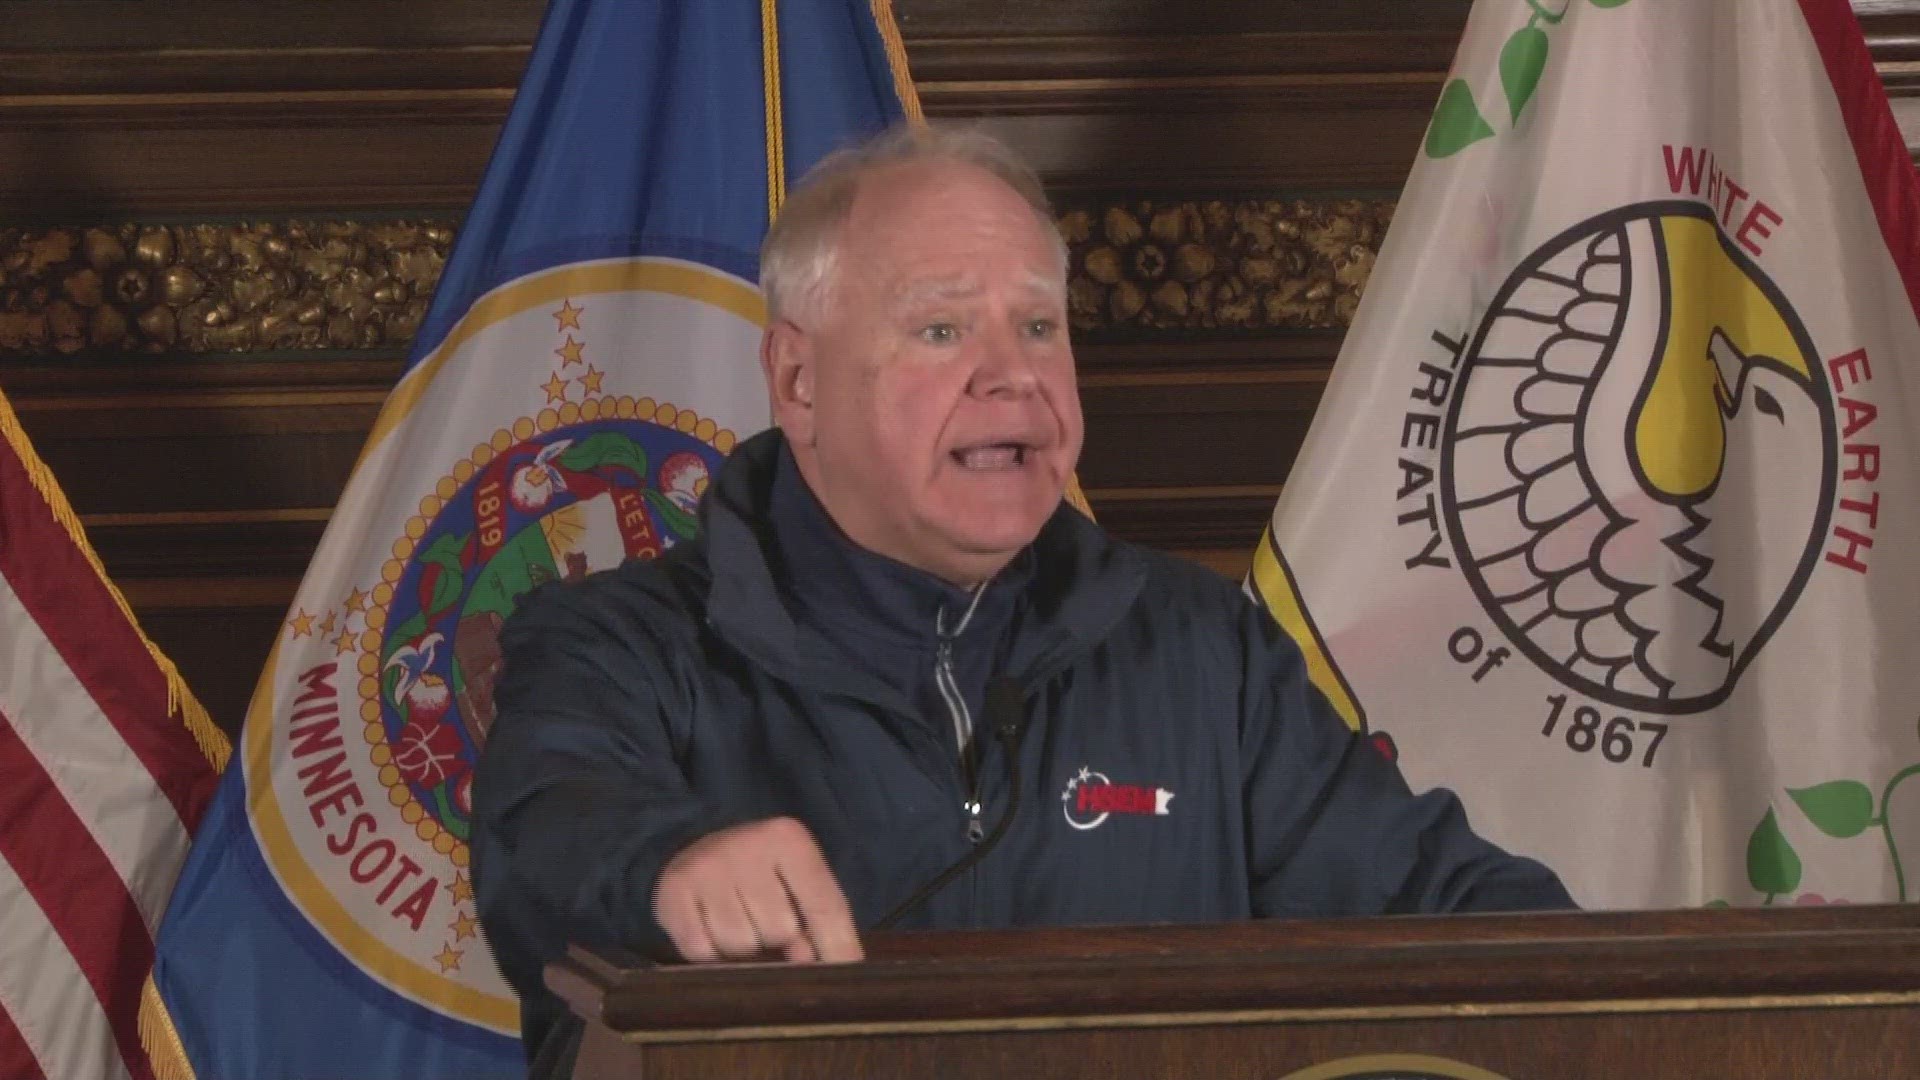 Gov. Tim Walz warned Senate Republicans they'll face a backlash from voters if they continue to oppose background checks and red flags bills at the State Capitol.